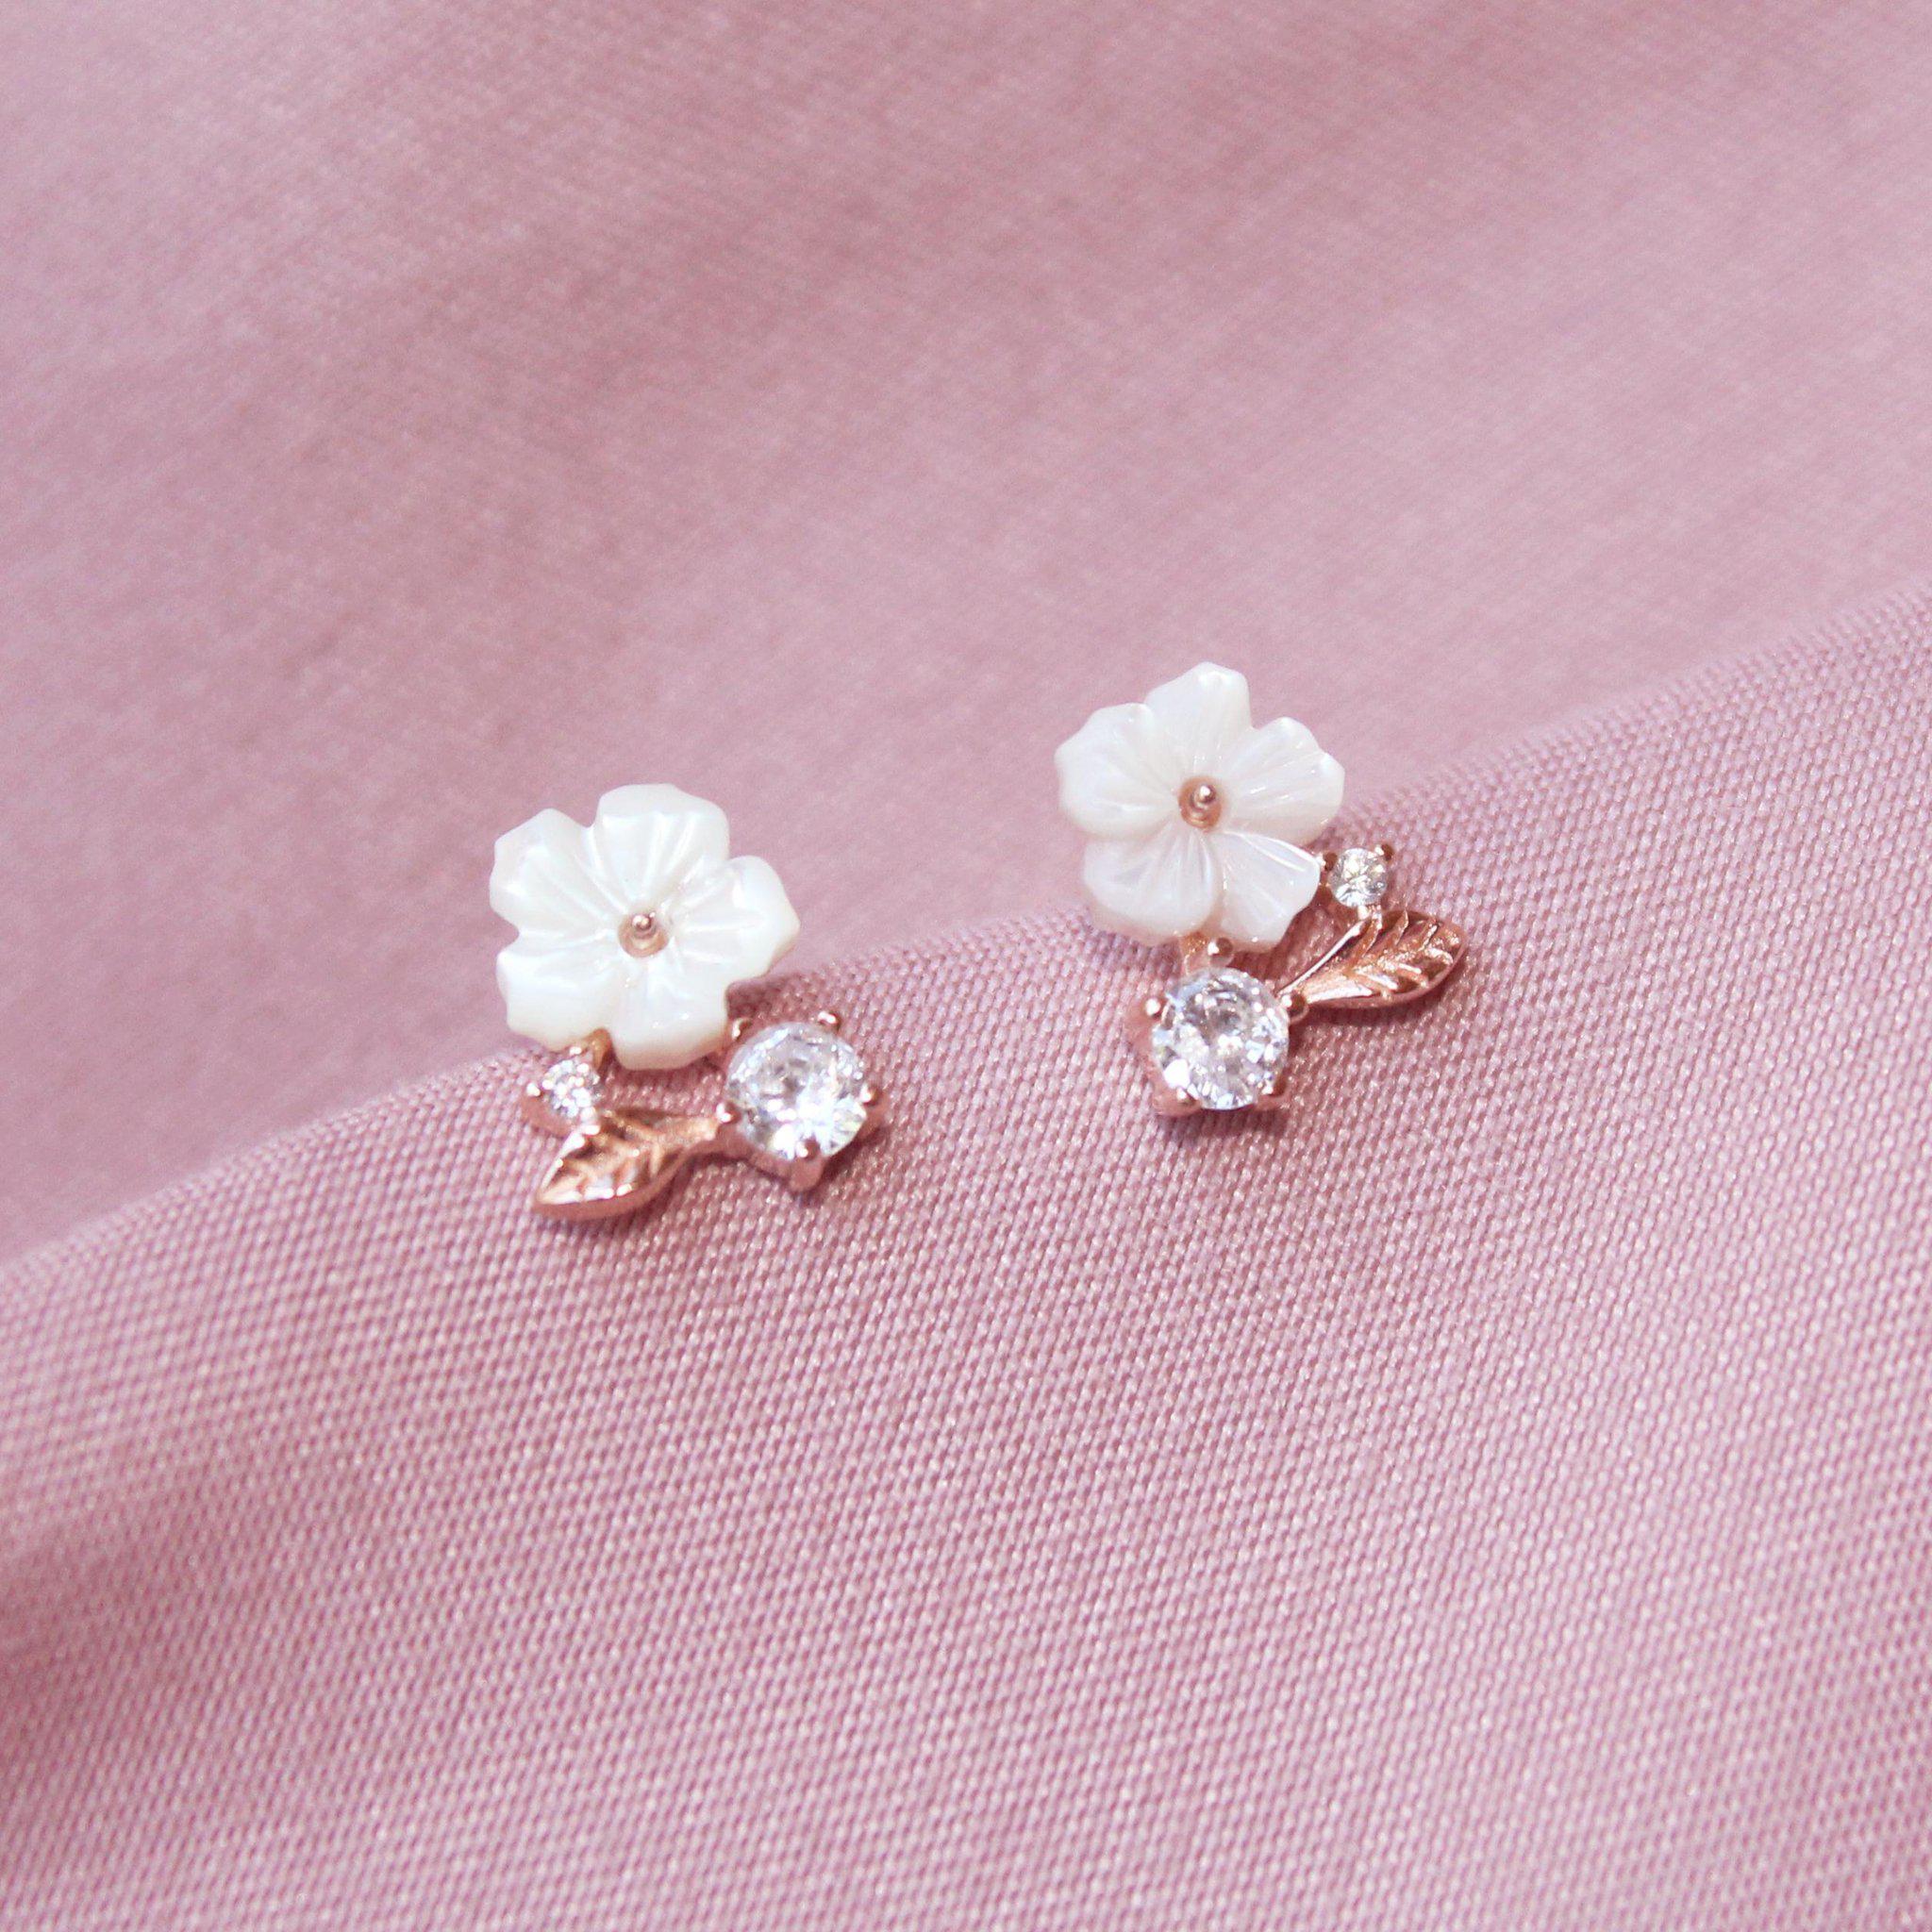 Spring Floral Earrings-Limited Edition-La Meno